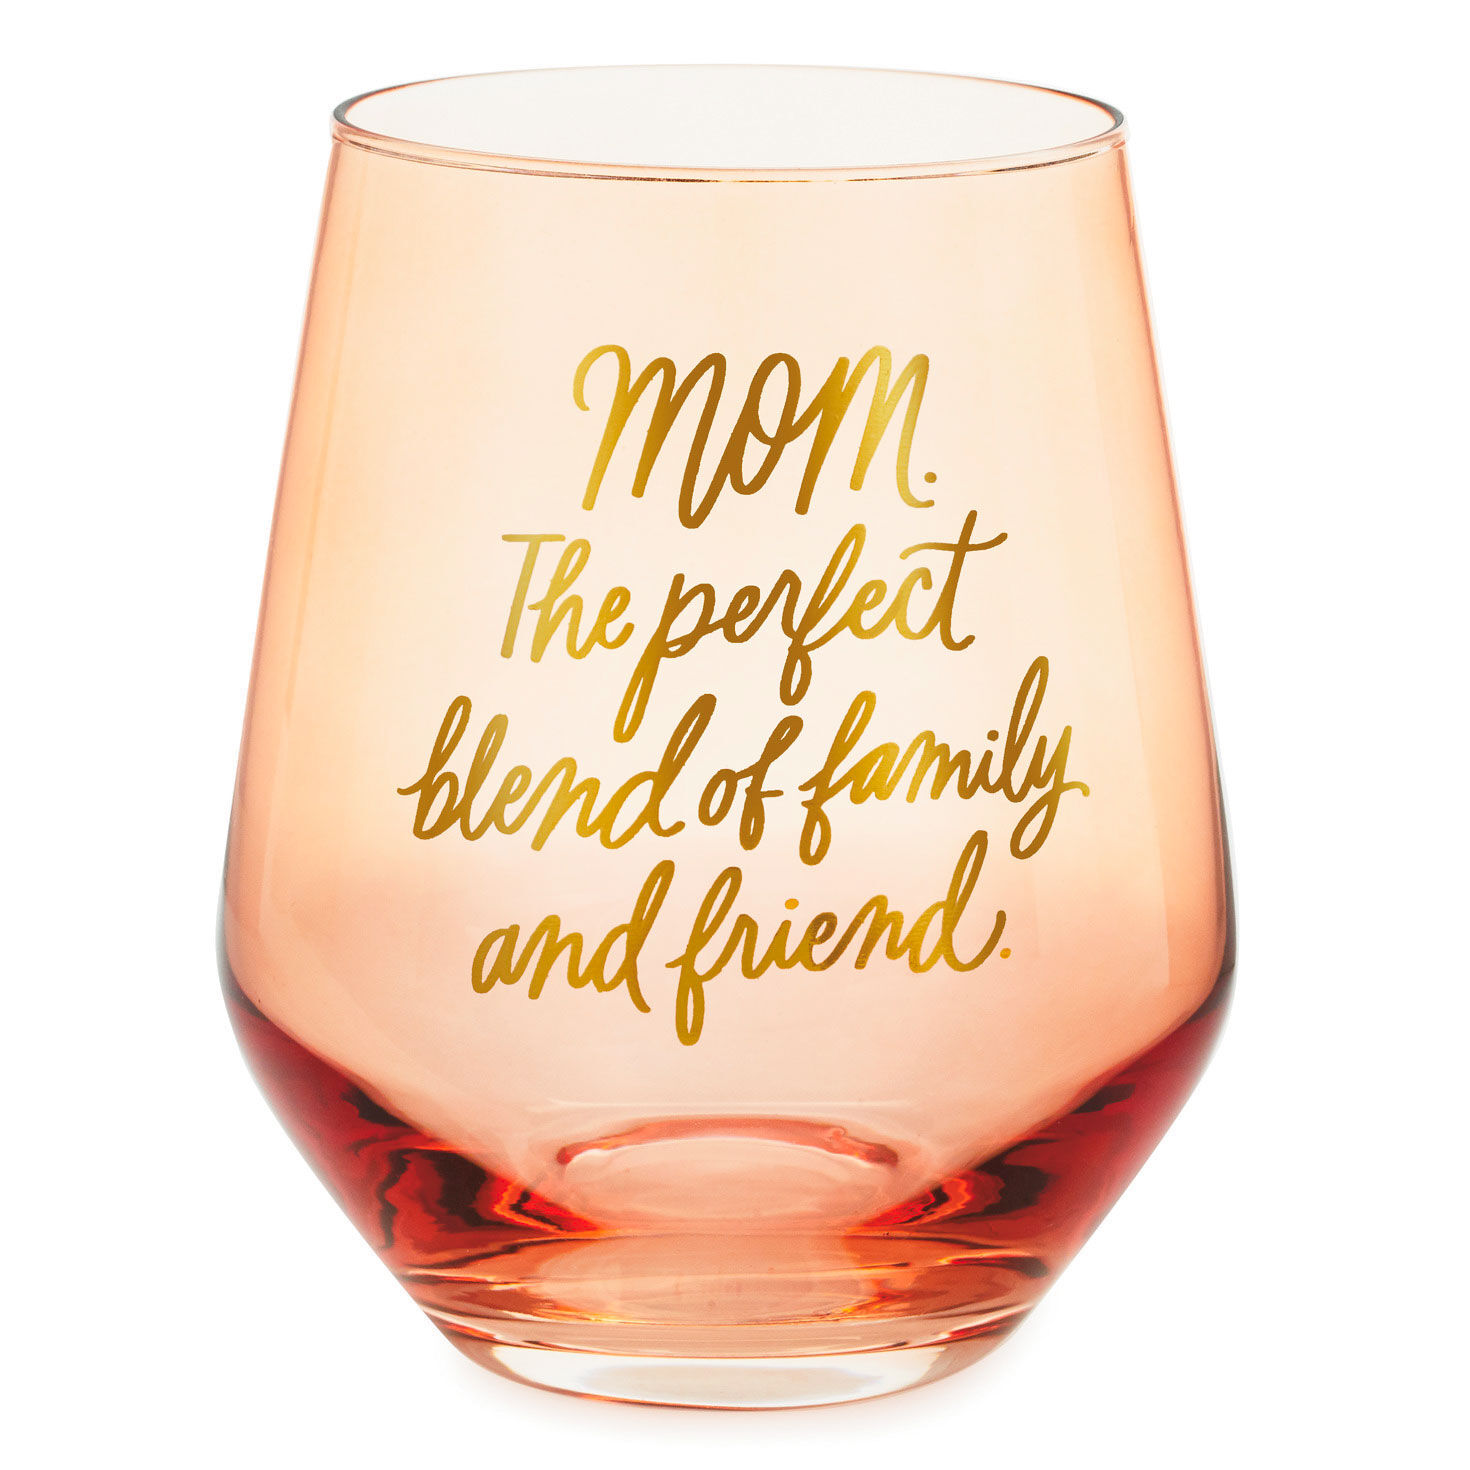 https://www.hallmark.com/dw/image/v2/AALB_PRD/on/demandware.static/-/Sites-hallmark-master/default/dwf1e9540c/images/finished-goods/products/1BRW3213/Mom-the-Perfect-Blend-Stemless-Wine-Glass_1BRW3213_01.jpg?sfrm=jpg